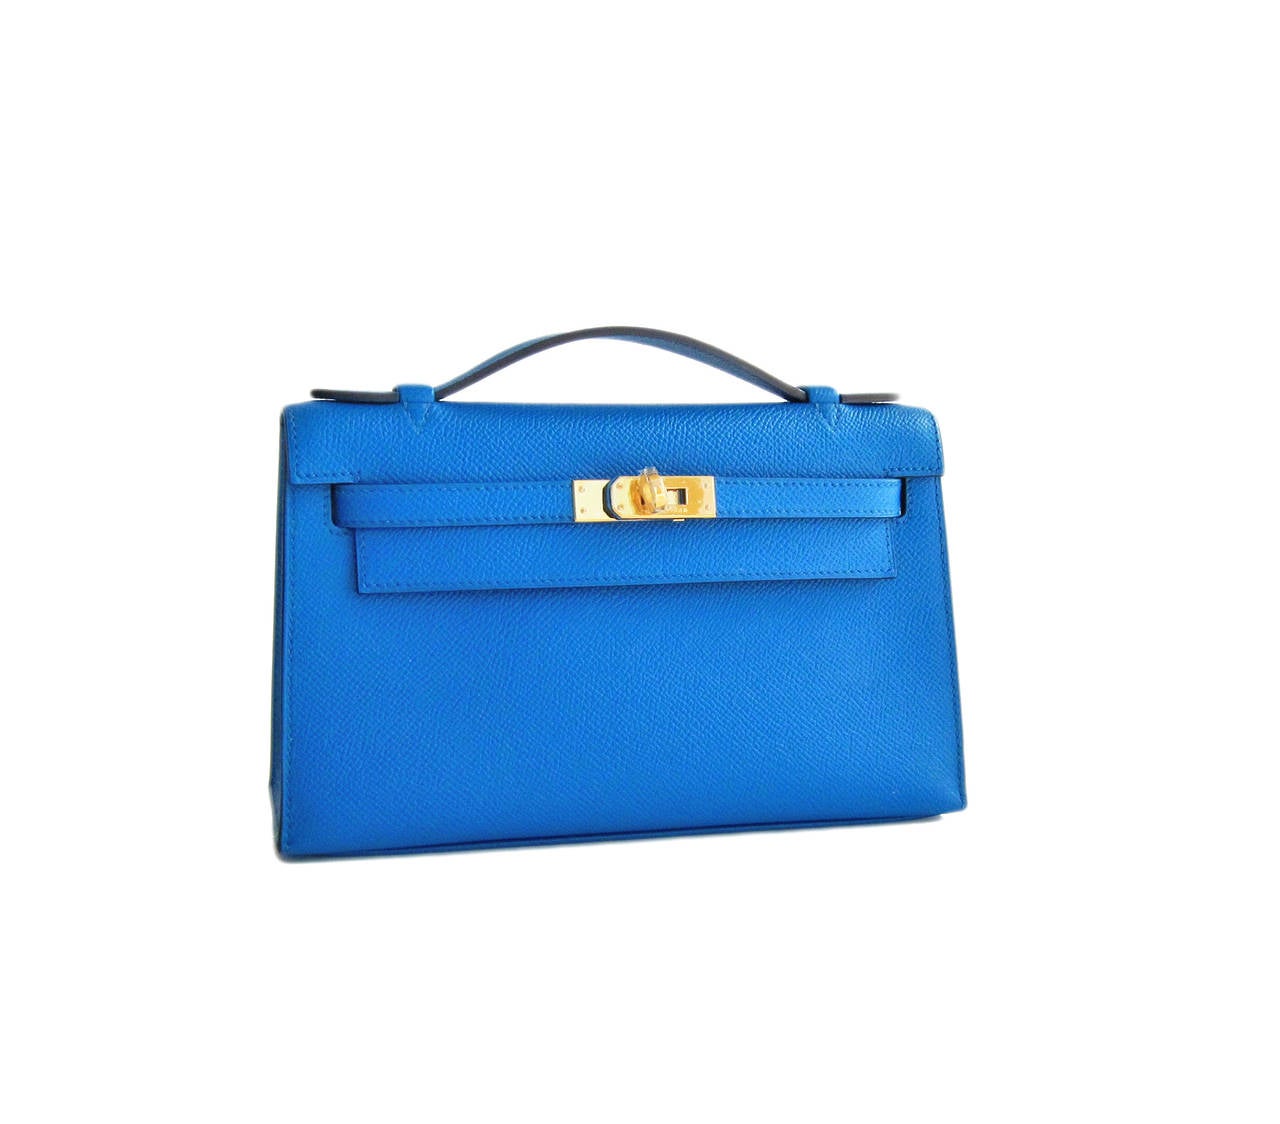 Hermes Blue Izmir Gold Kelly Pochette Epsom GHW Clutch Cut Bag Insane
Brand New in Box.  Store fresh.  Pristine condition.
Perfect gift!  Coming in full set with Hermes sleeper, box and ribbon
Blue Izmir set against gold hardware is an insanely